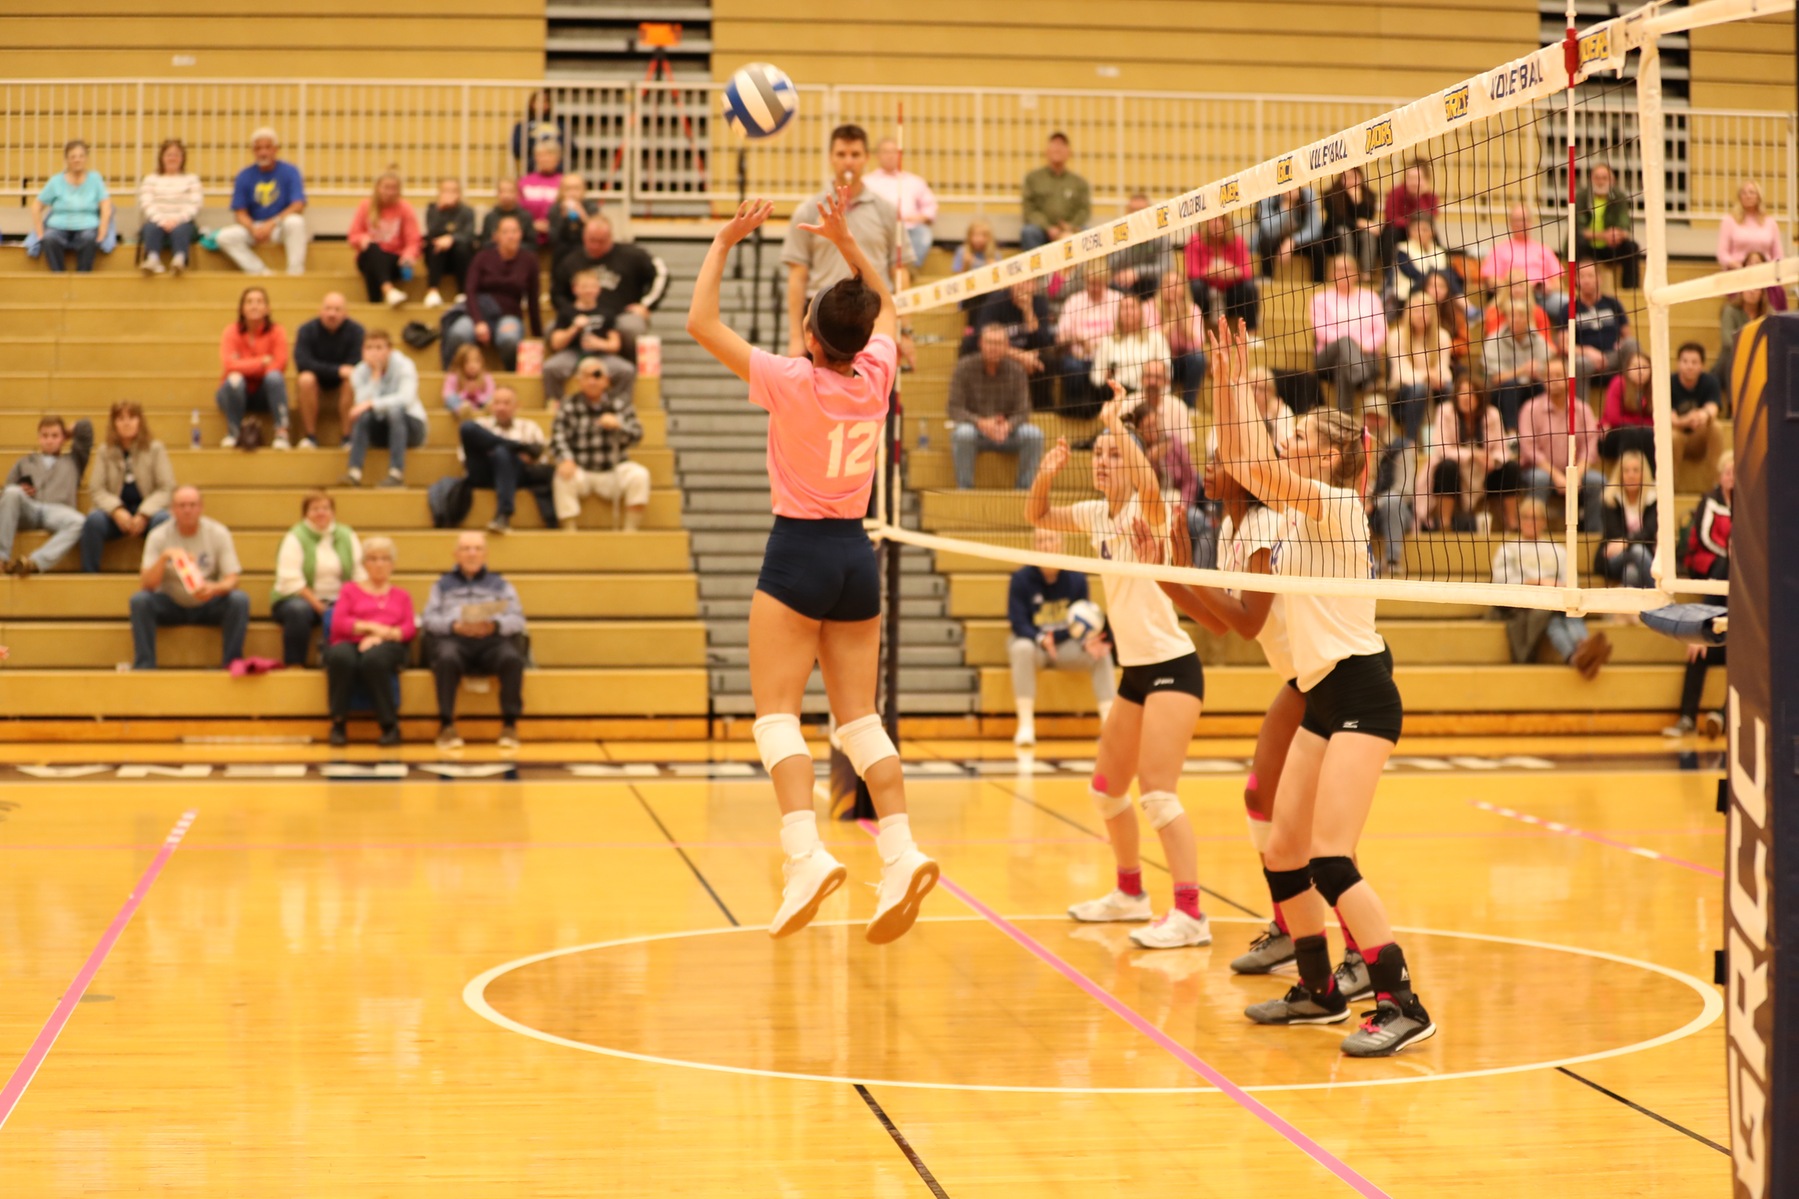 Grand Rapids setter sets the ball in a match against Kellogg CC